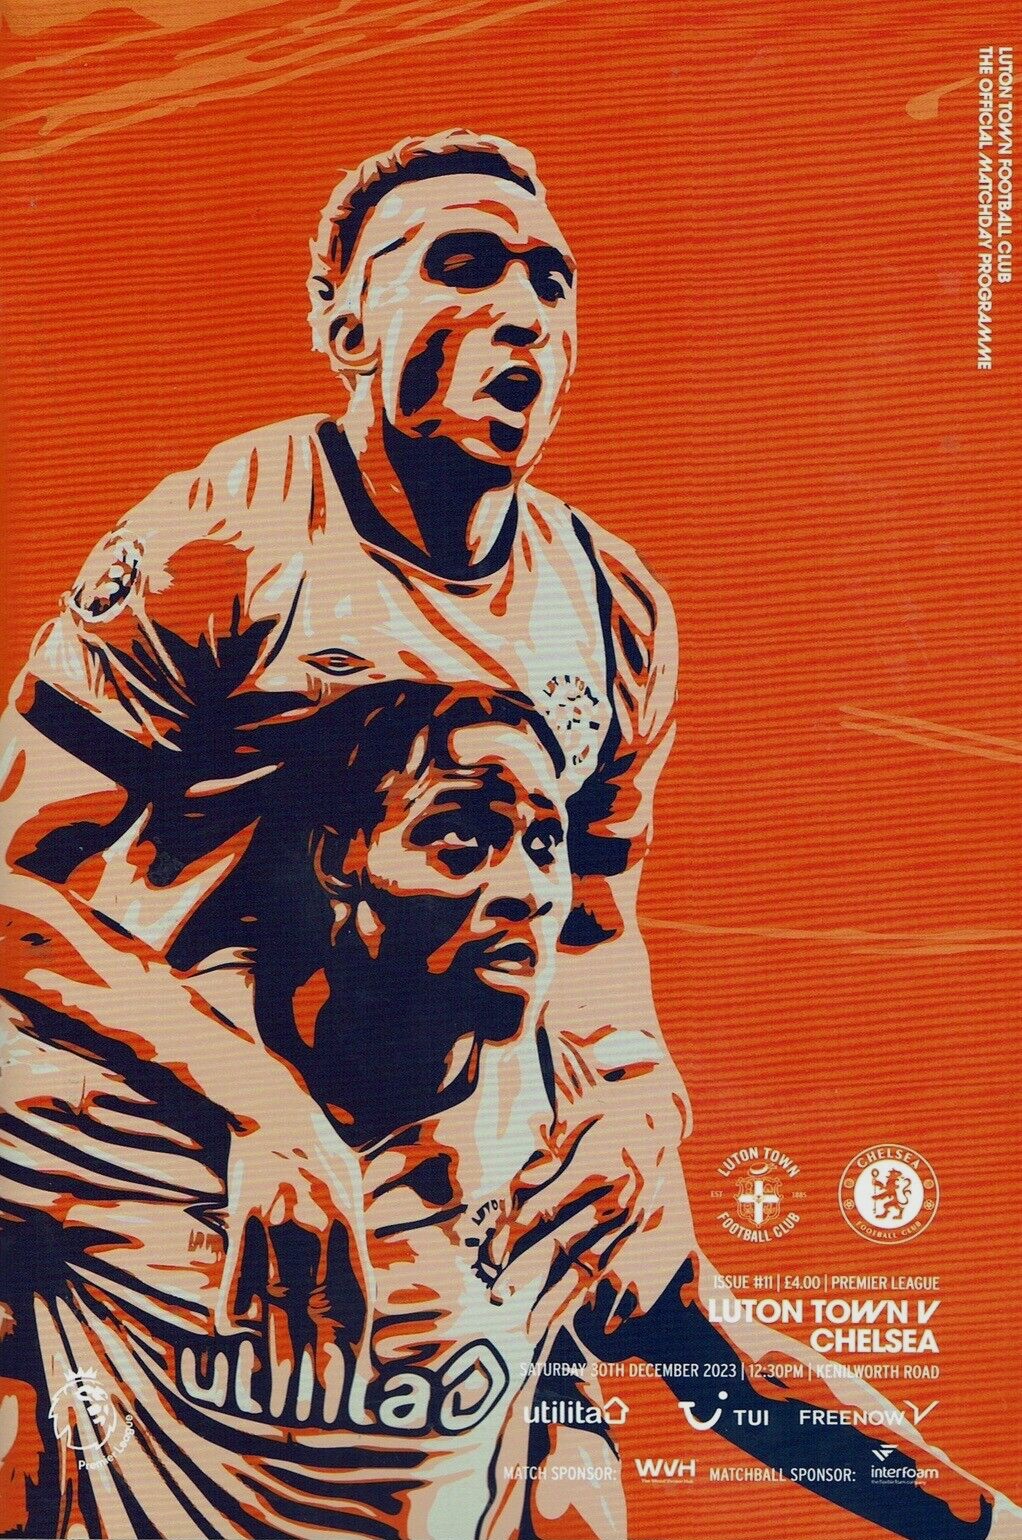 programme cover for Luton Town v Chelsea, 30th Dec 2023